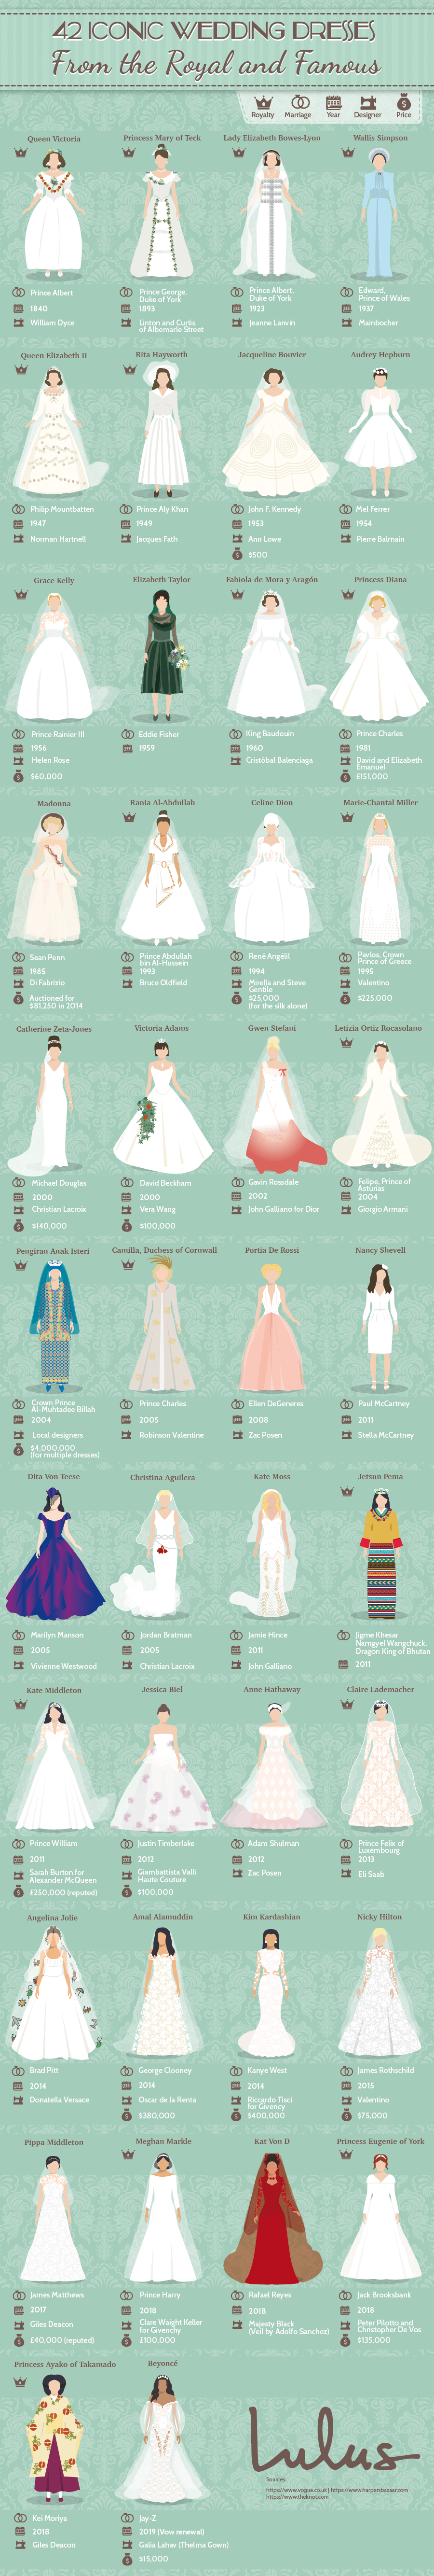 42 Awesome Wedding Dresses of the Rich ’n’ Famous - Infographic